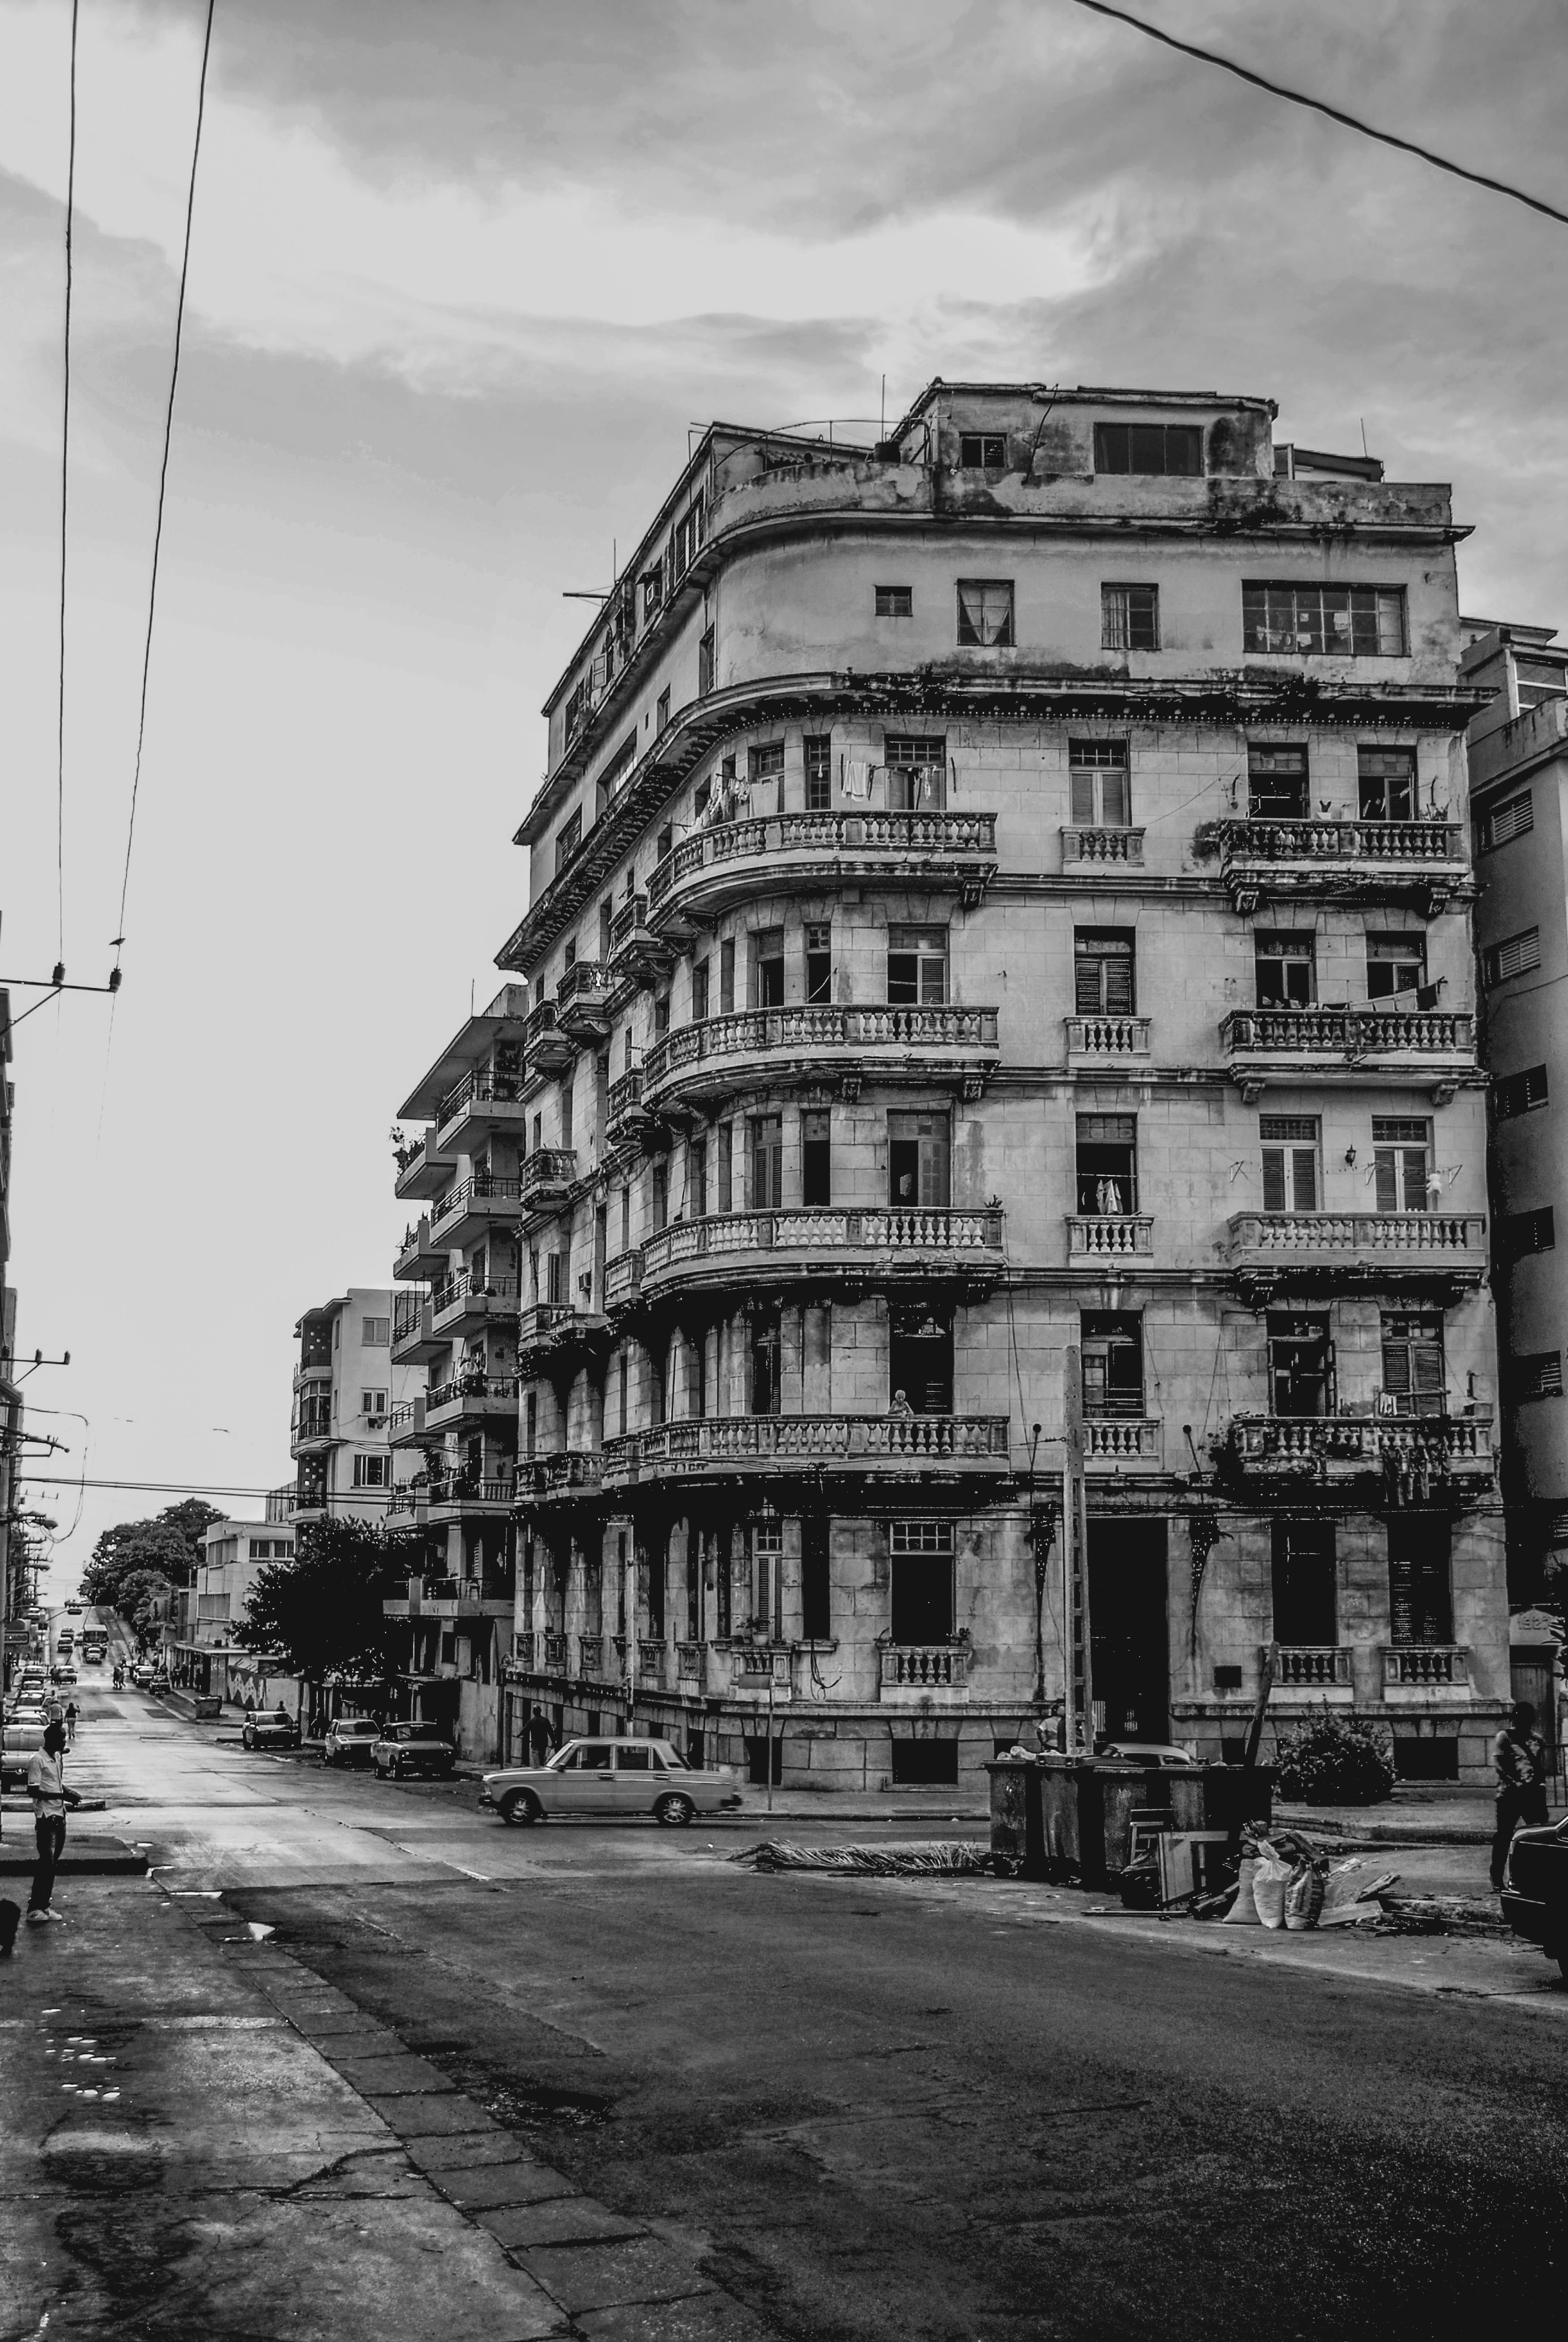 Architecture Photography. La Habana, an image of an anachronistic city where the time don't pass by. (La Habana, 2011)  